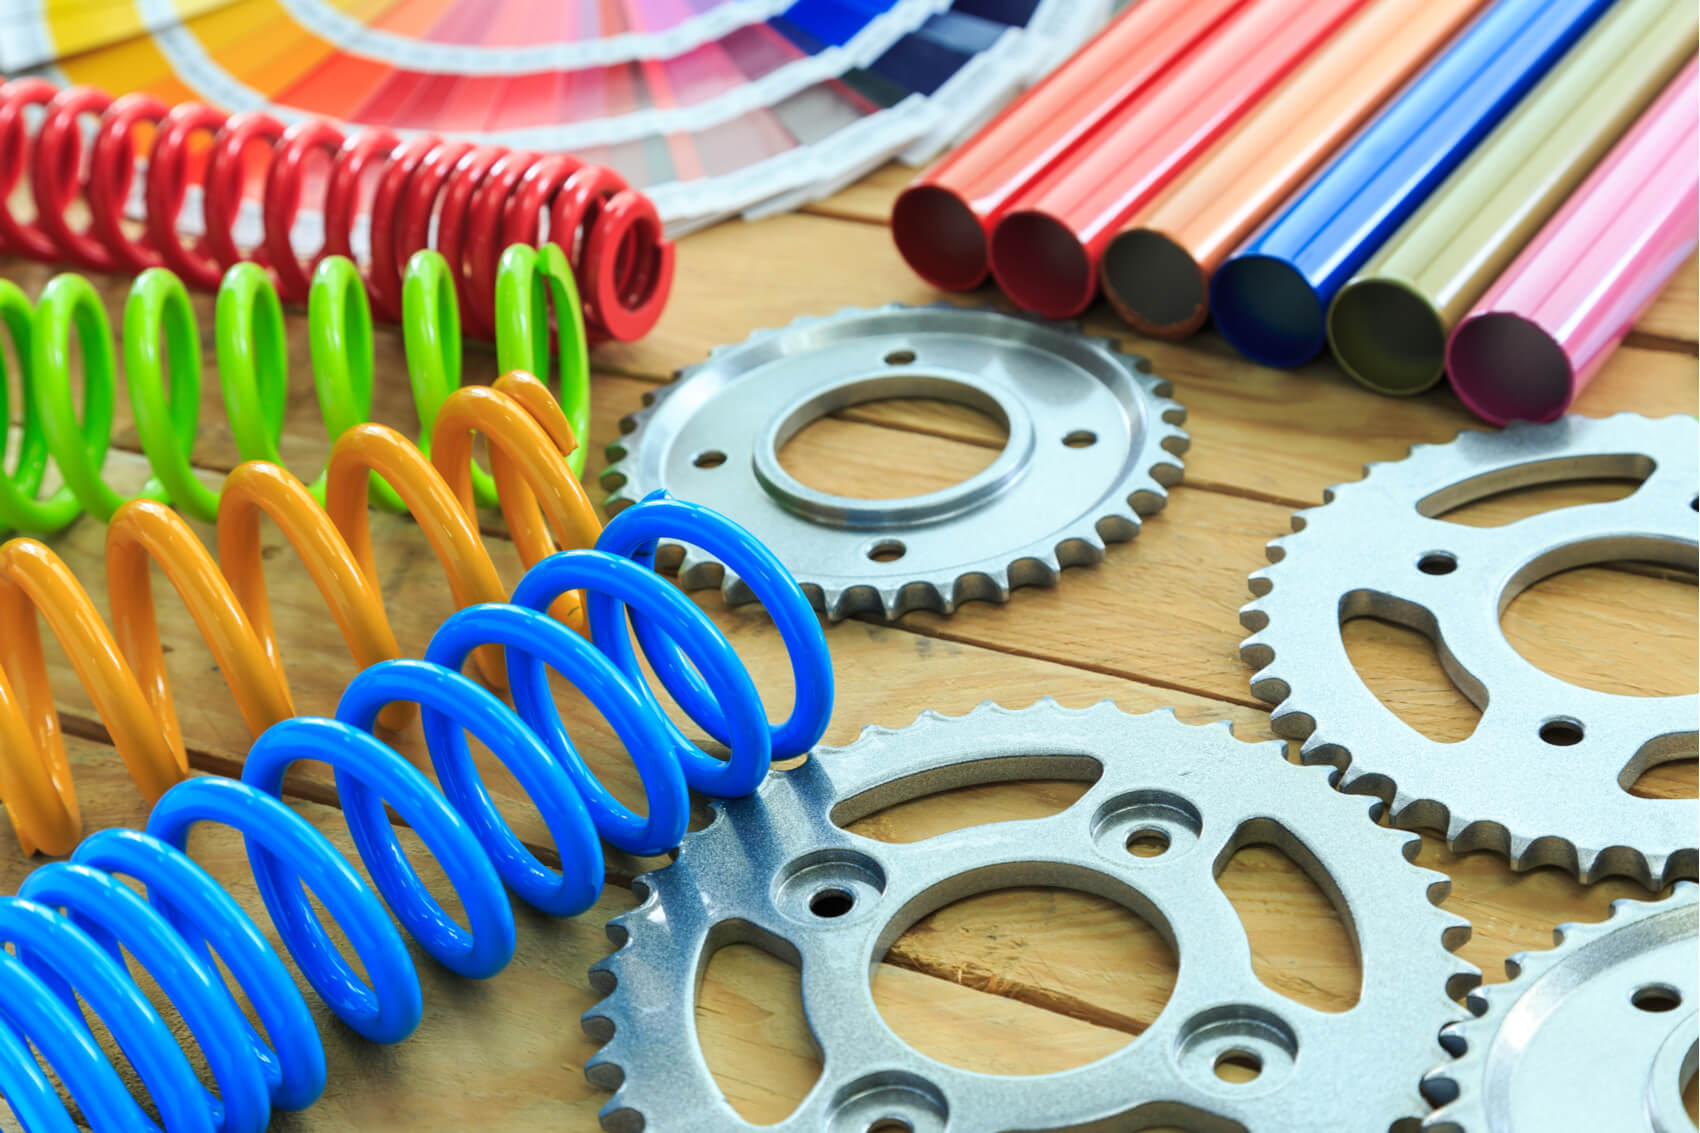 a colorful array of powder coated metal items